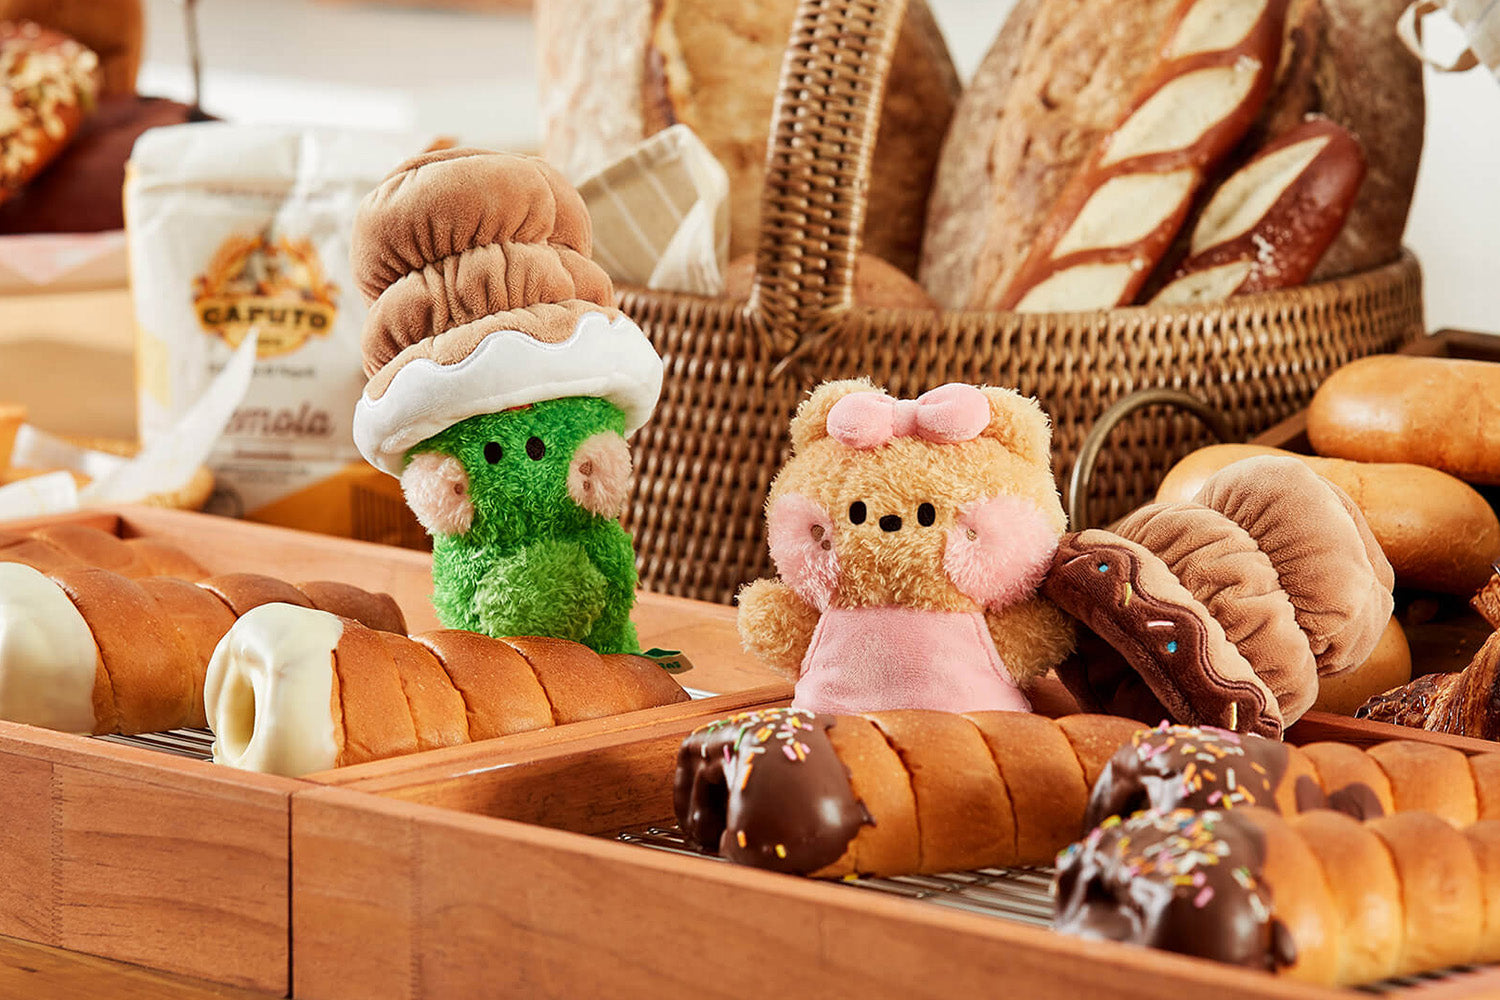 LINE FRIENDS chonini BAKERY STANDING DOLL – LINE FRIENDS COLLECTION STORE